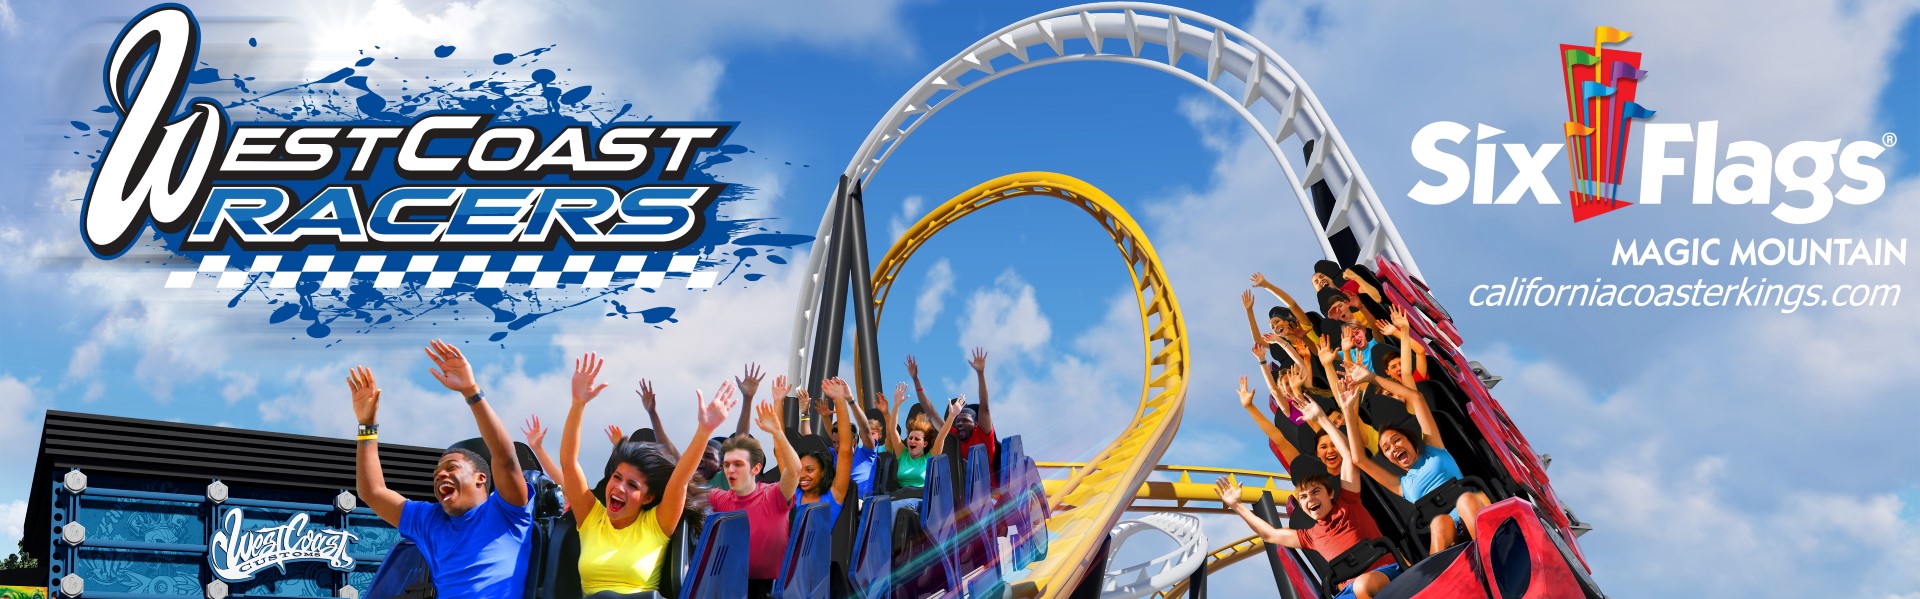 Six Flags Magic Mountain to add racing coaster with side-by-side tracks